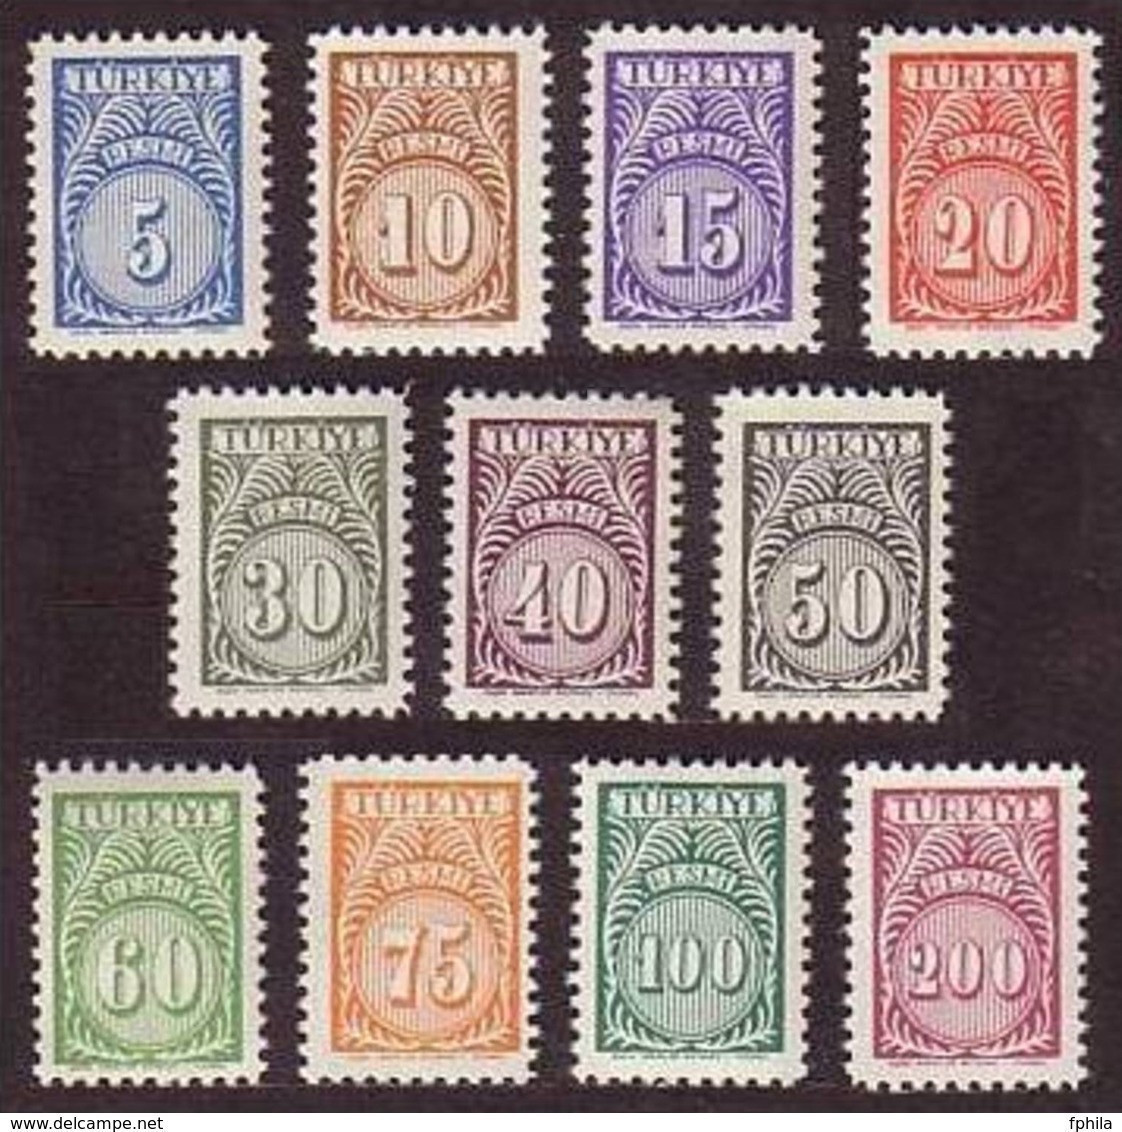 1957 TURKEY OFFICIAL STAMPS MNH ** - Timbres De Service